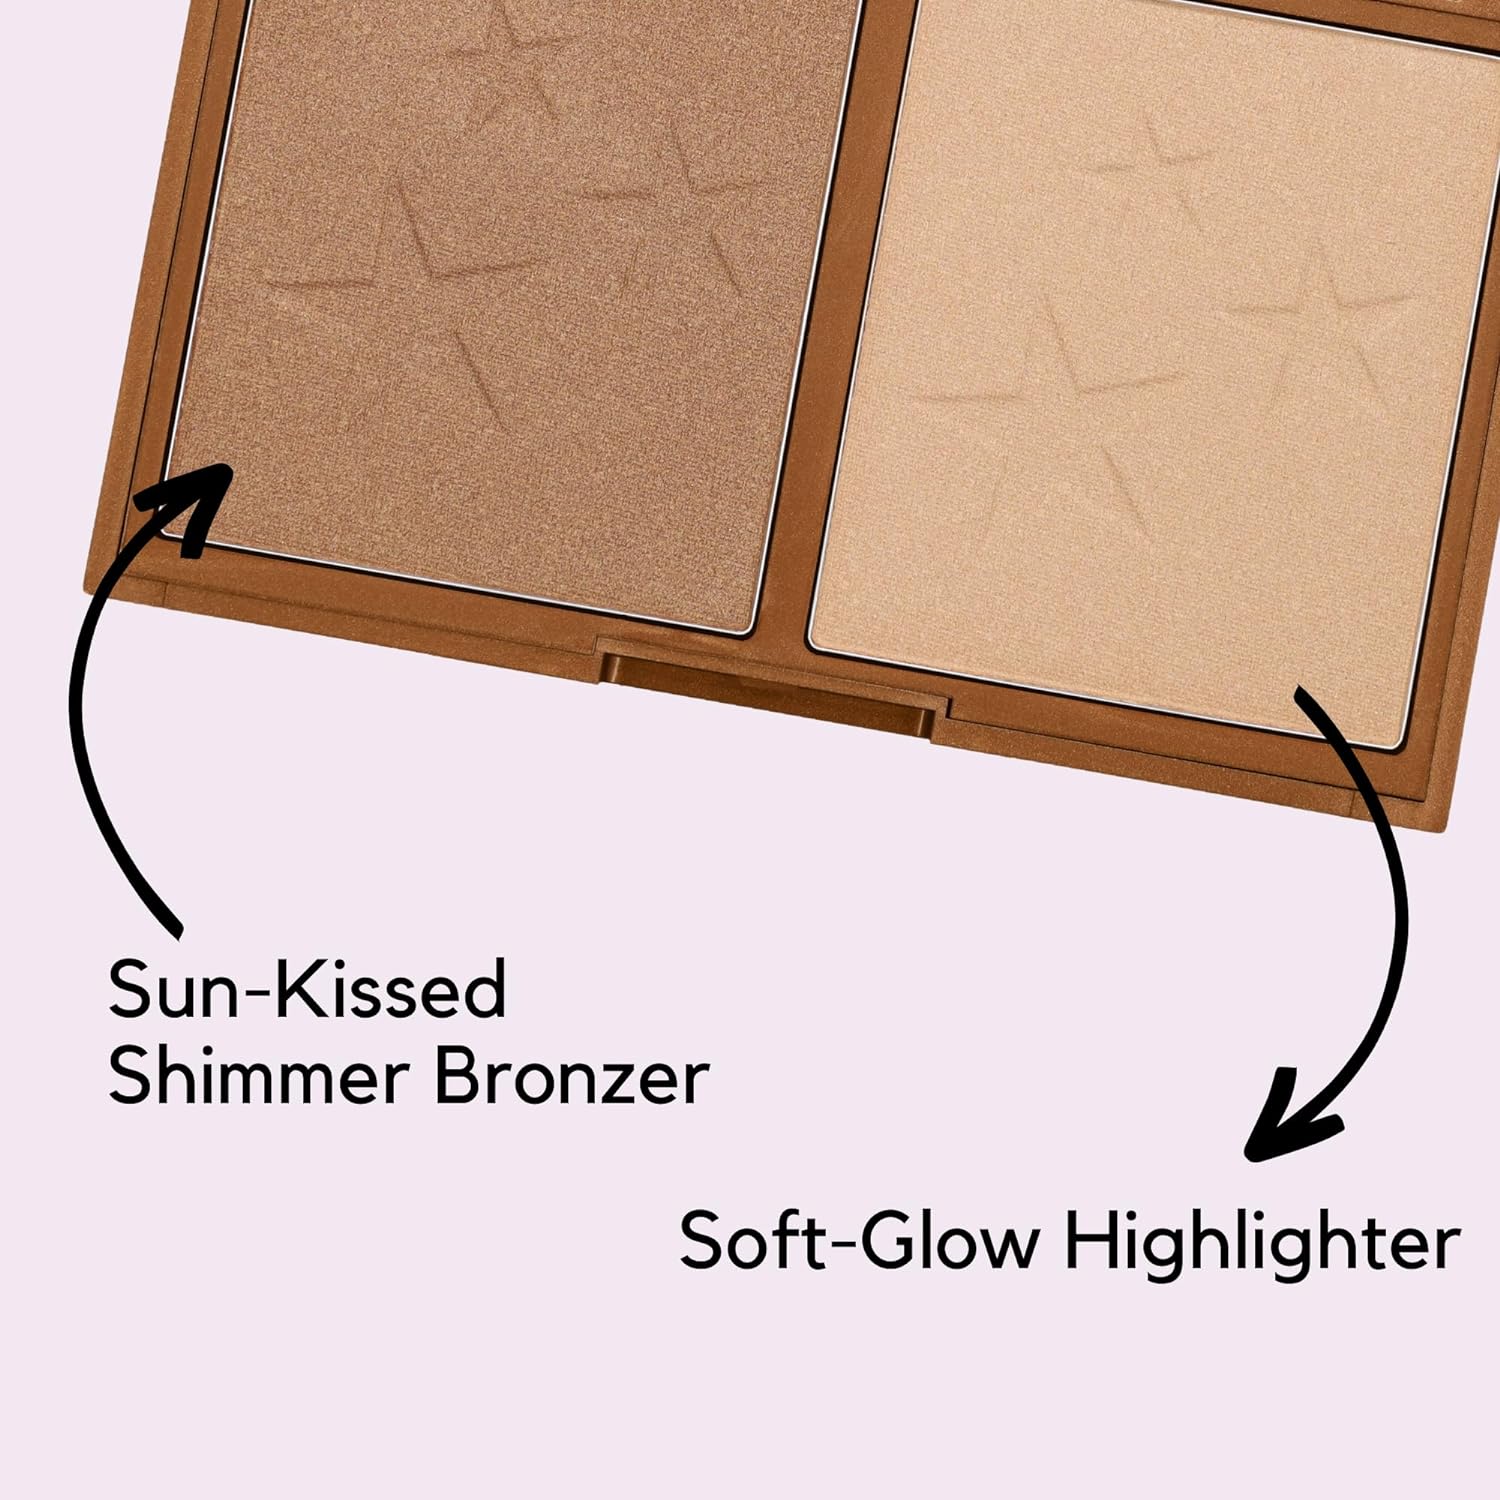 W7 Hollywood Bronze & Glow - Pressed Powder Duo Shimmer Bronzer & Highlighter - Contouring & Highlighting Vegan Makeup : Beauty & Personal Care